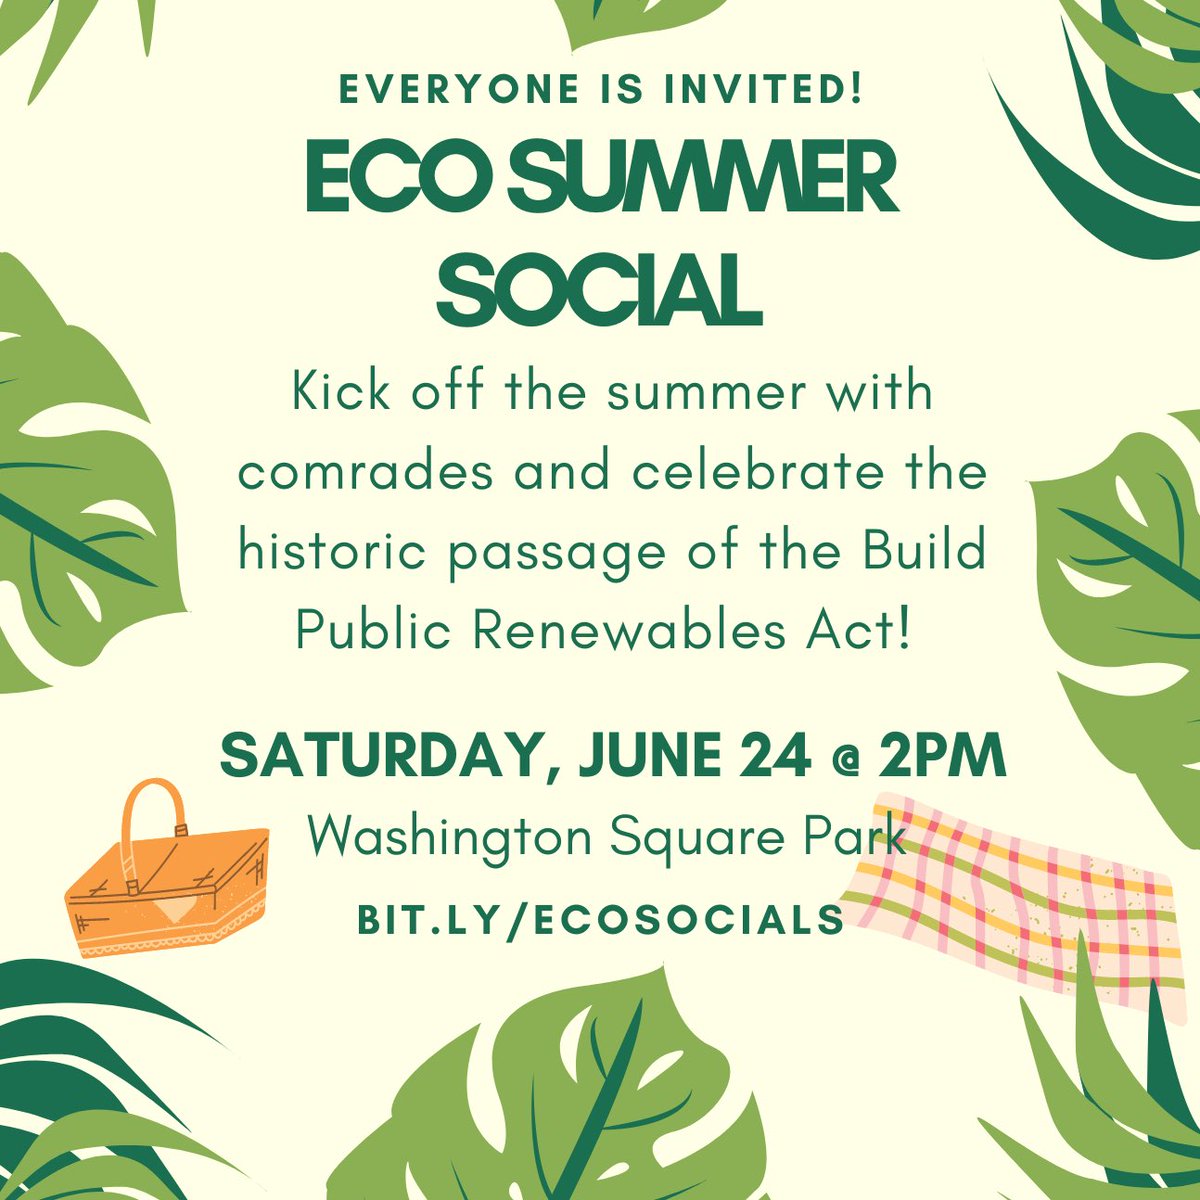 Join us next Saturday to celebrate #BuildPublicRenewables and hang out w/ fellow ecosocialists! New & existing members are welcome!

There will be lawn games, crafting, and snacks, please bring your favorite treats, beverages, and comrades 🌹

RSVP➡️ bit.ly/ecosocials